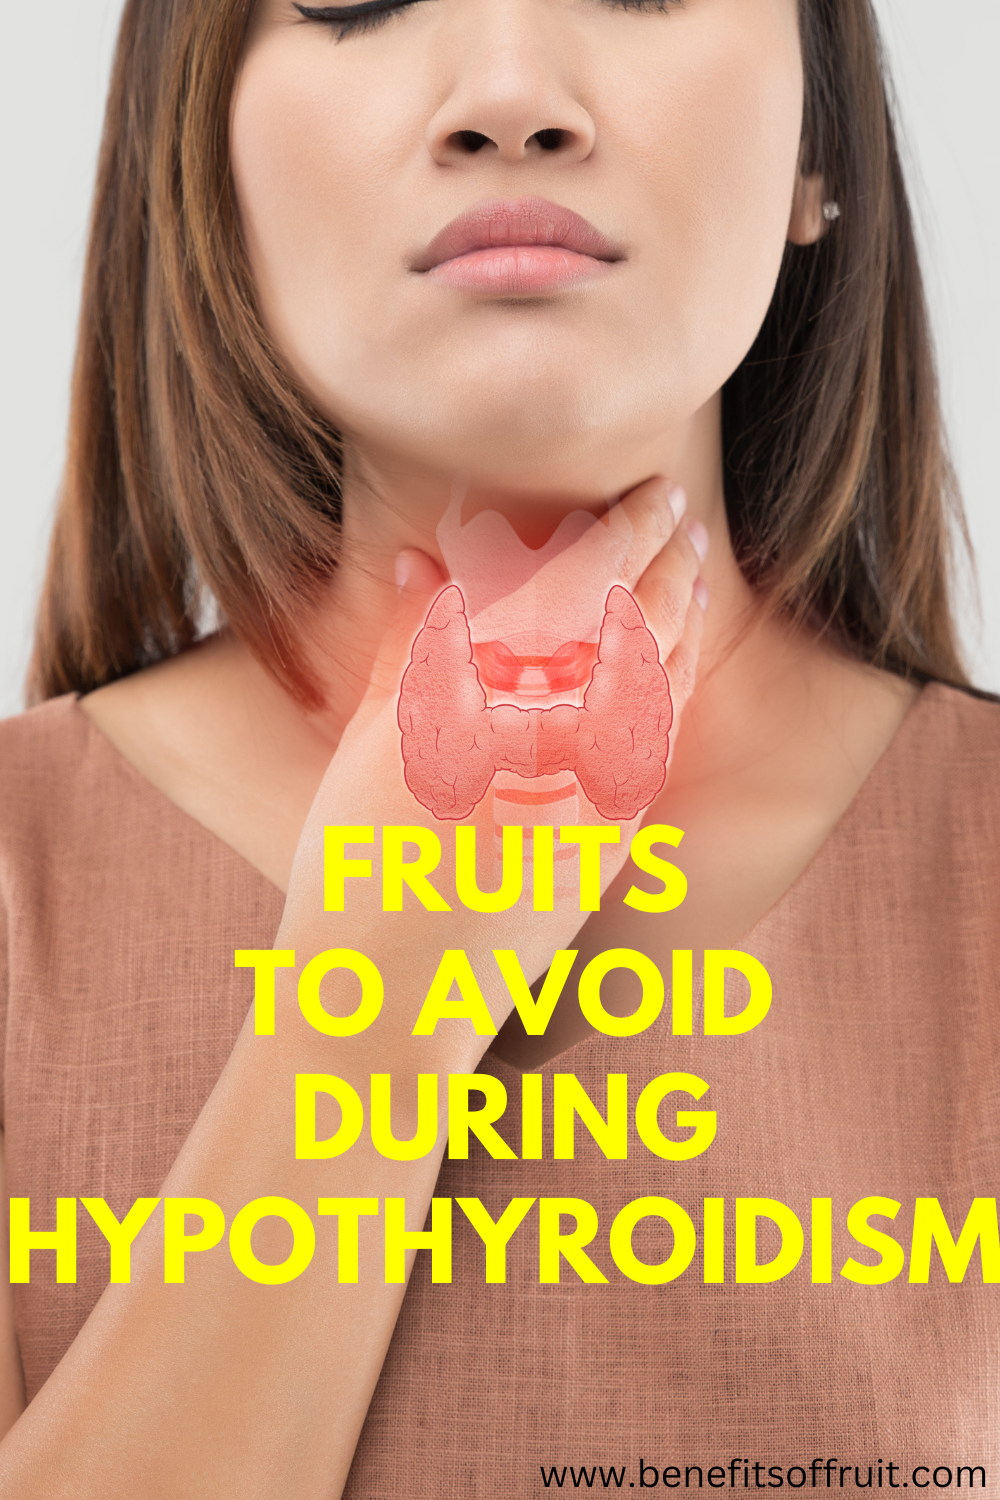 Fruits To Avoid During Hypothyroidism